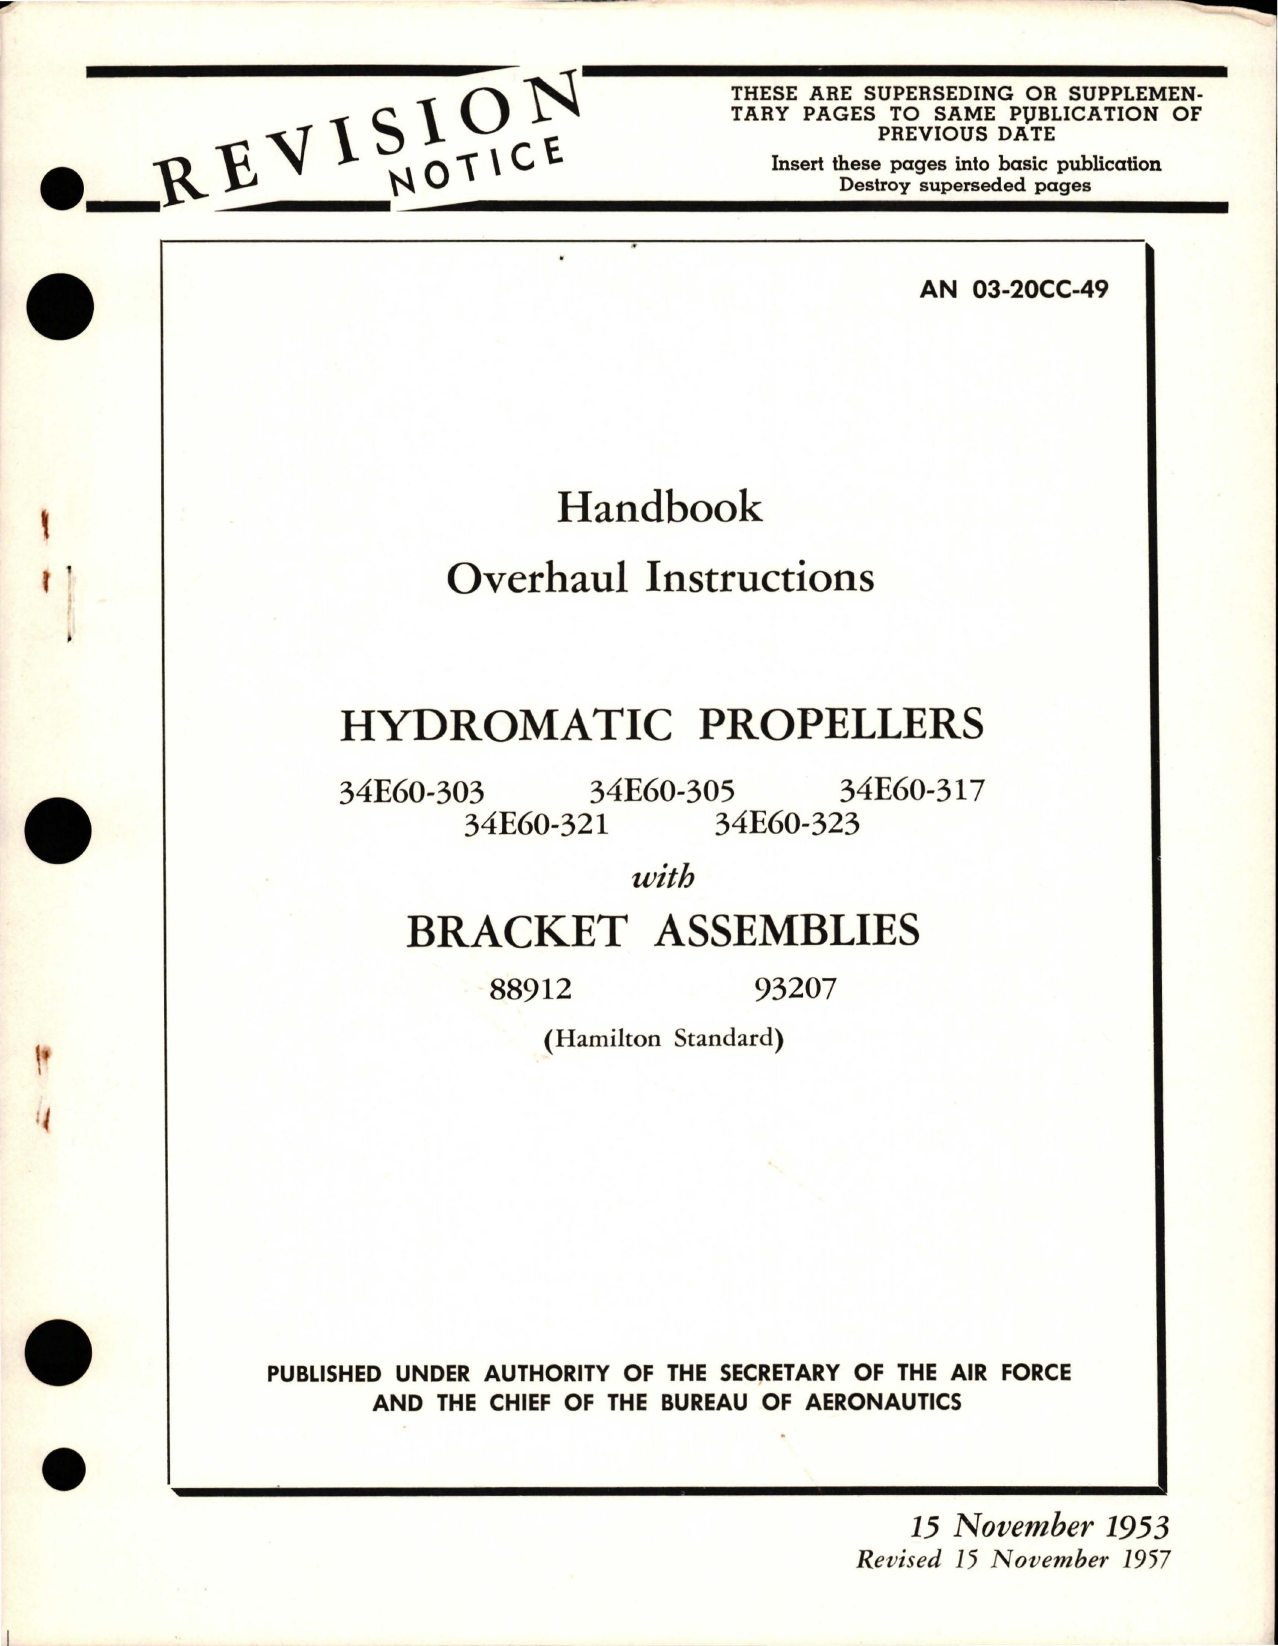 Sample page 1 from AirCorps Library document: Overhaul Instructions for Hydromatic Propeller and Bracket Assemblies